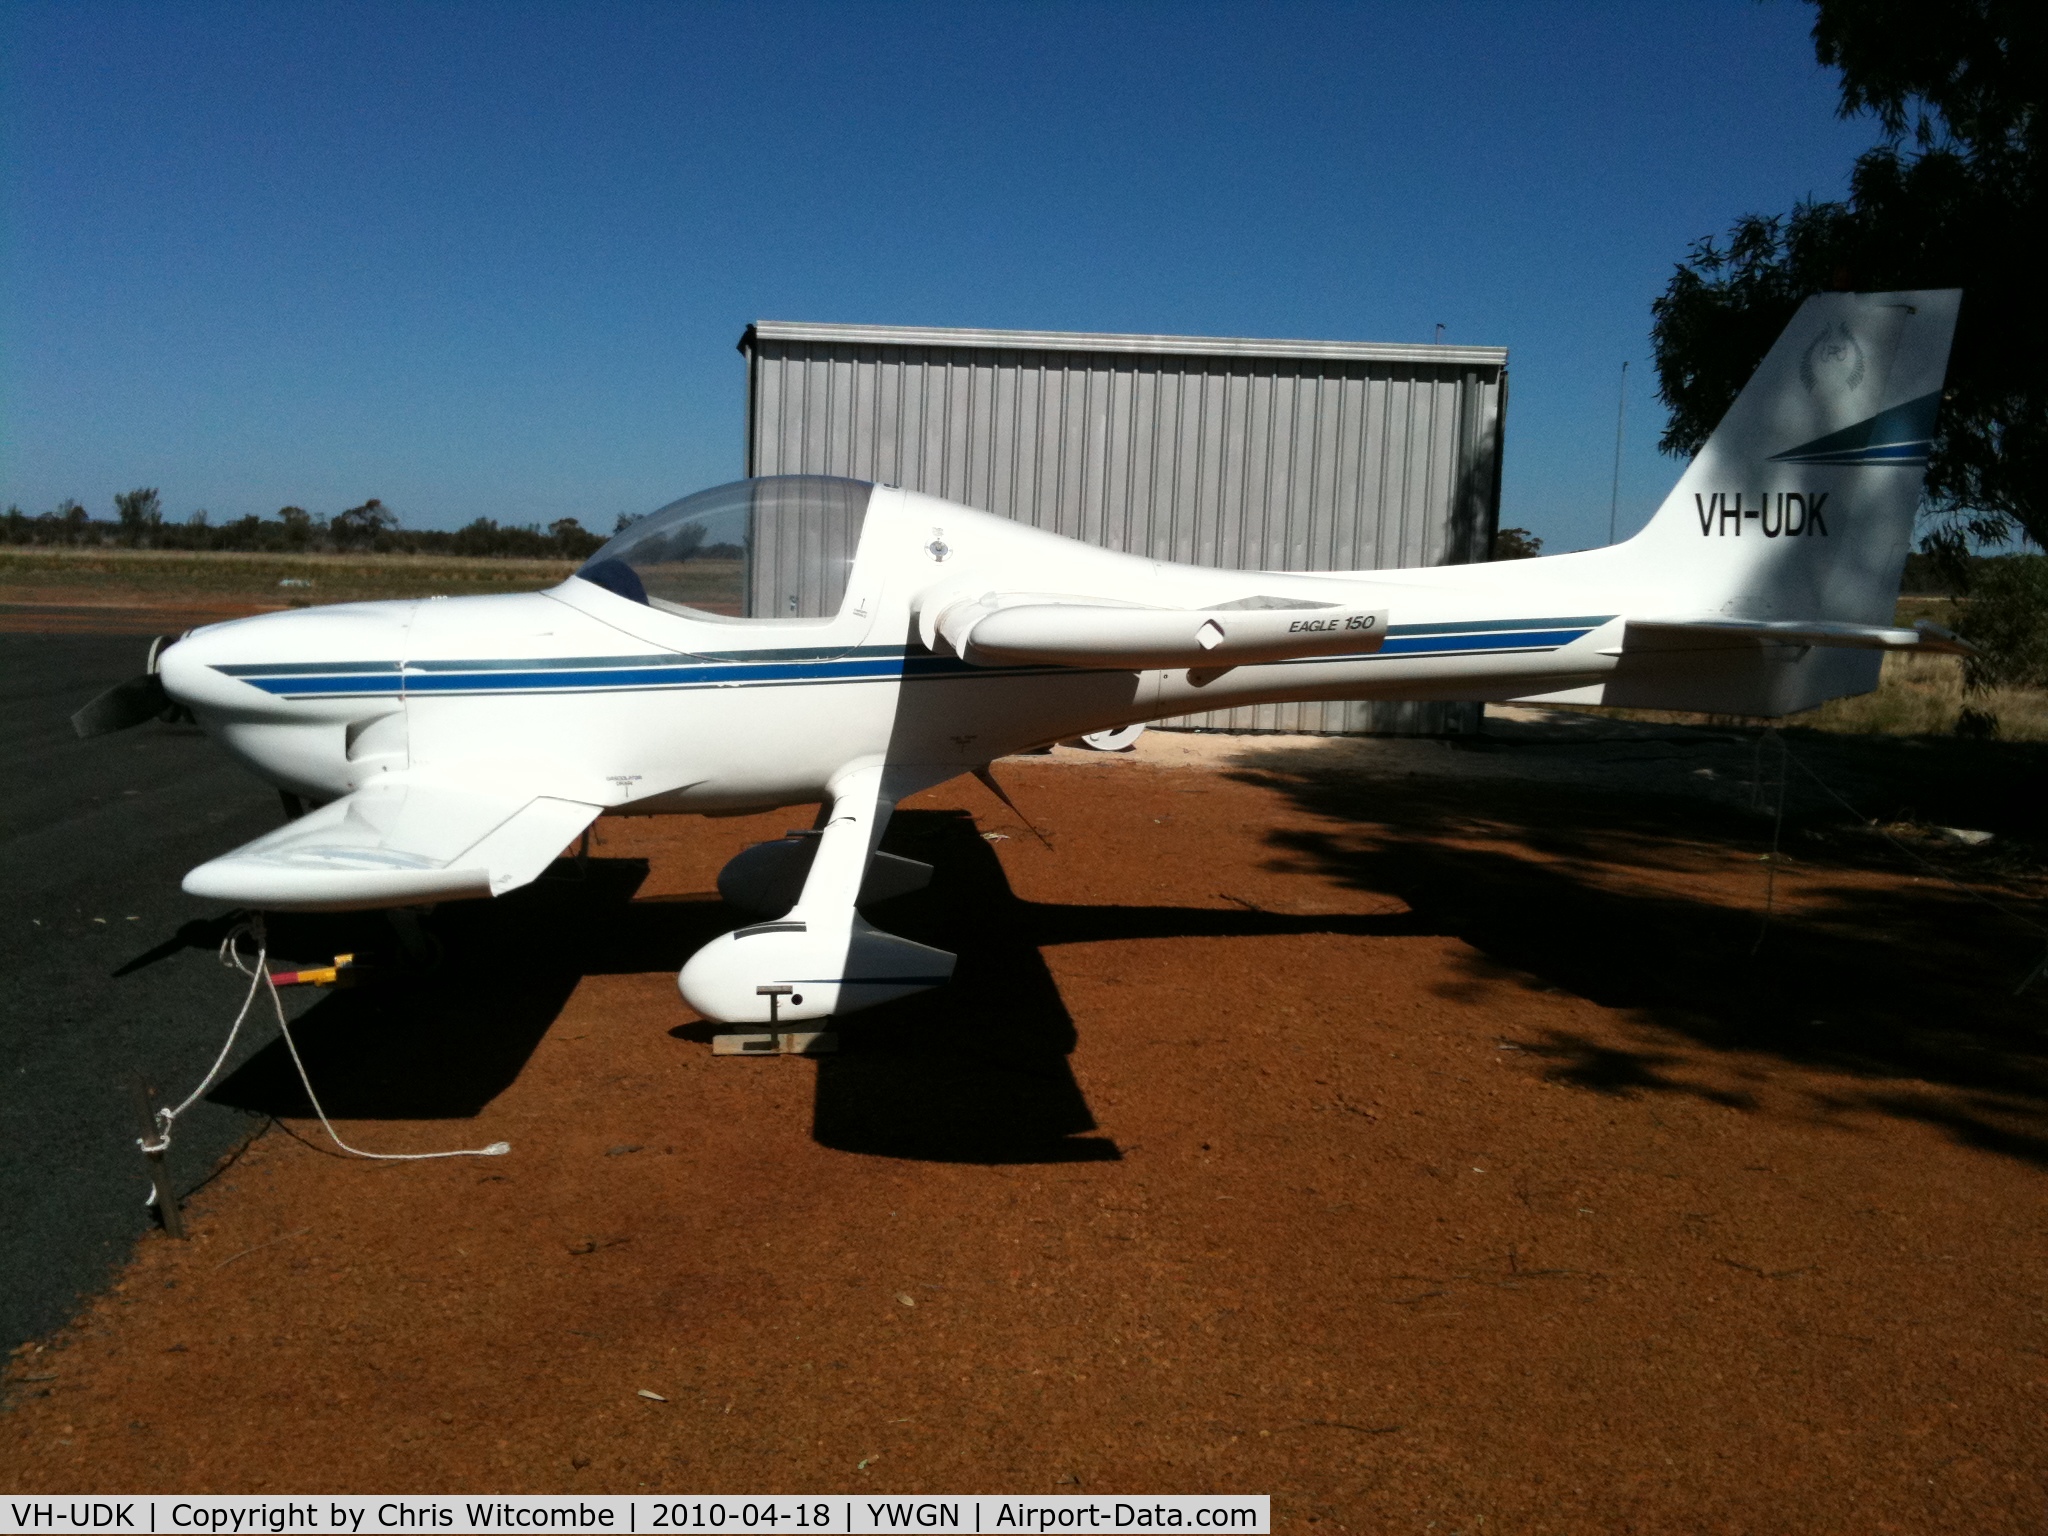 VH-UDK, 1997 Eagle Aircraft Eagle 150 X-TS C/N 012, Taken Prior to purchase at Wagin Airfield